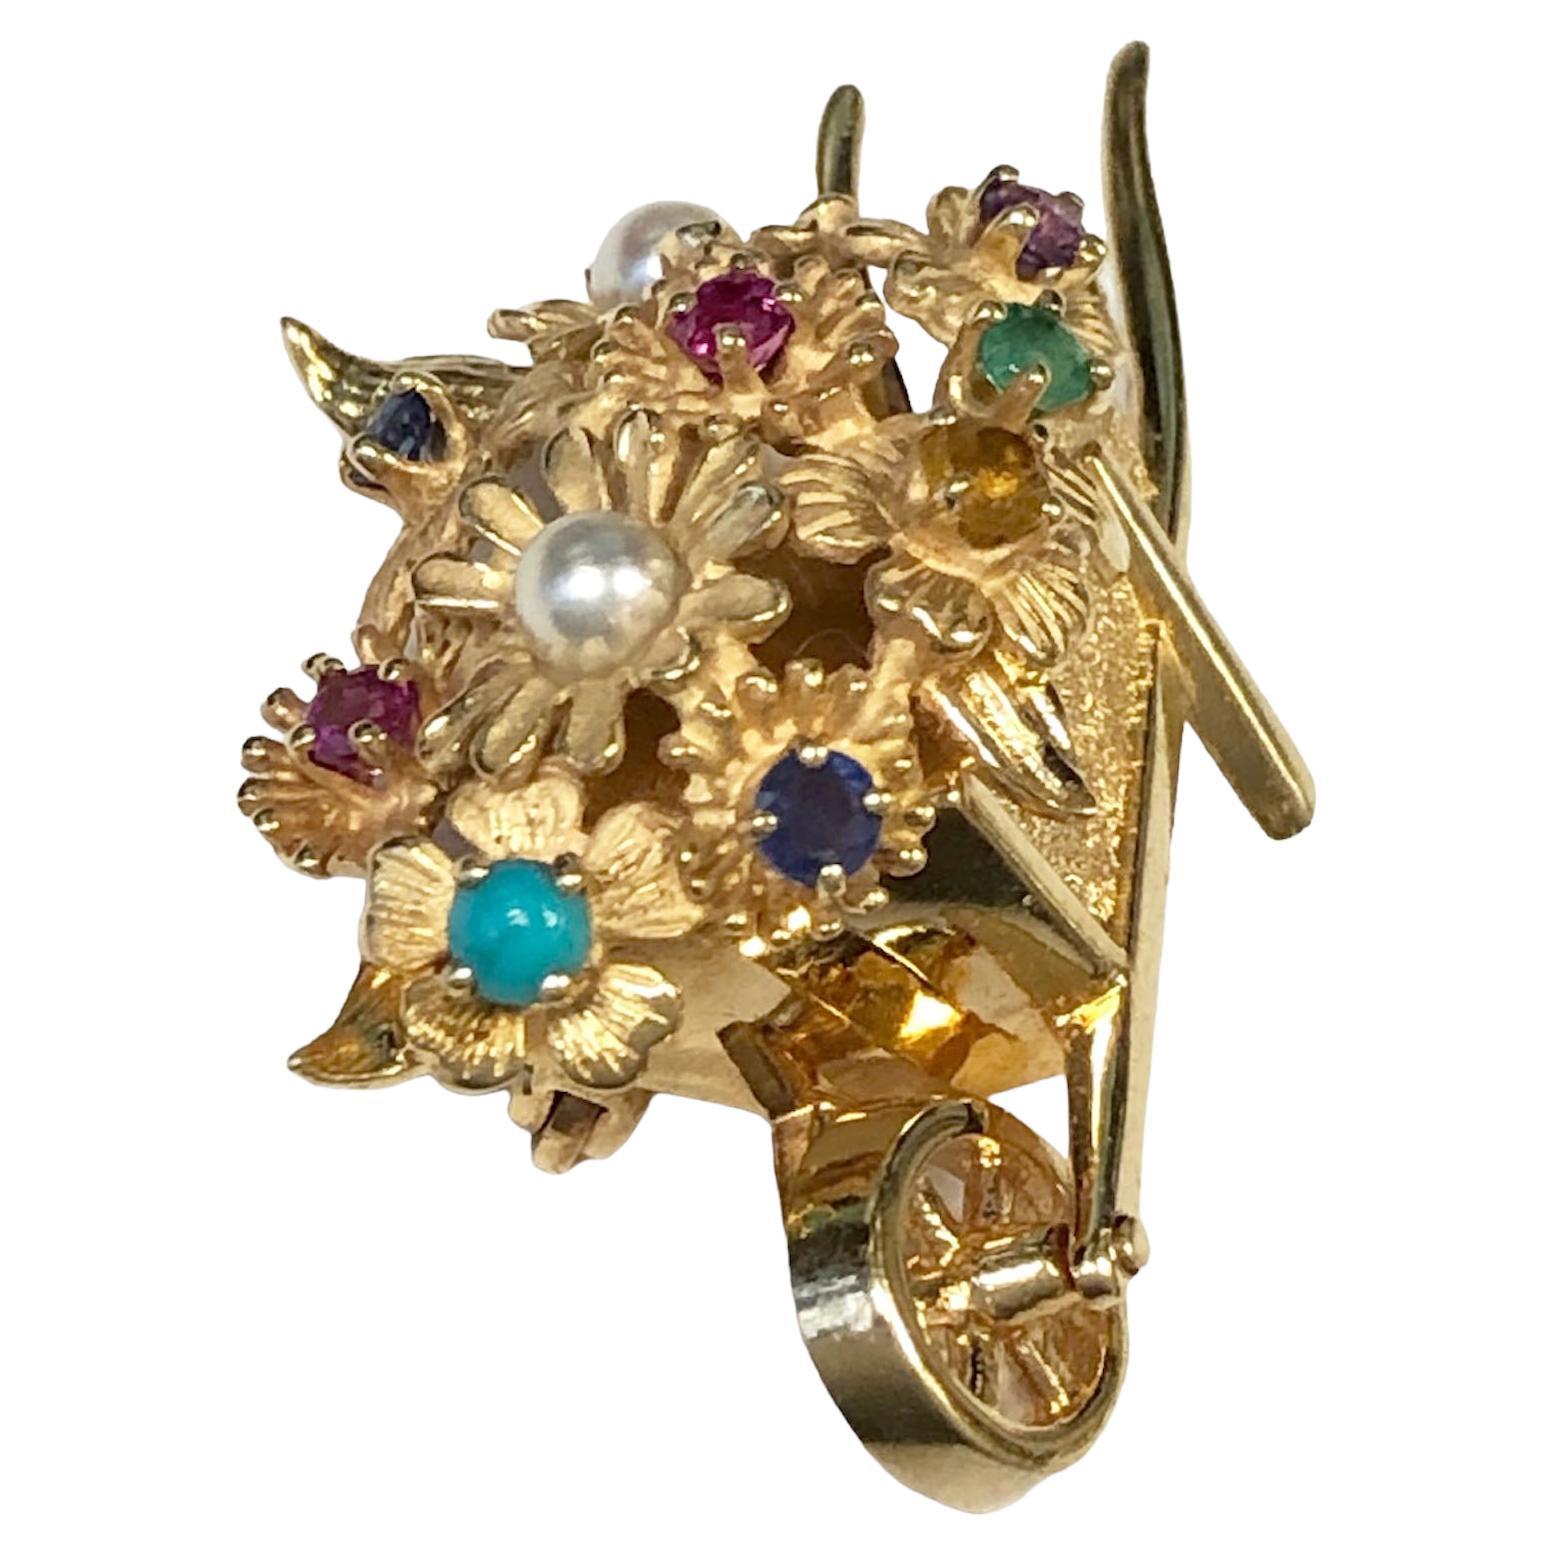 Circa 1960s Henry Dankner & Sons New York Dankner 14k Yellow Gold Wheel Barrow Brooch, measuring 1 3/8 inches in length X 3/4 inch, very detailed and set with numerous Gemstones. 